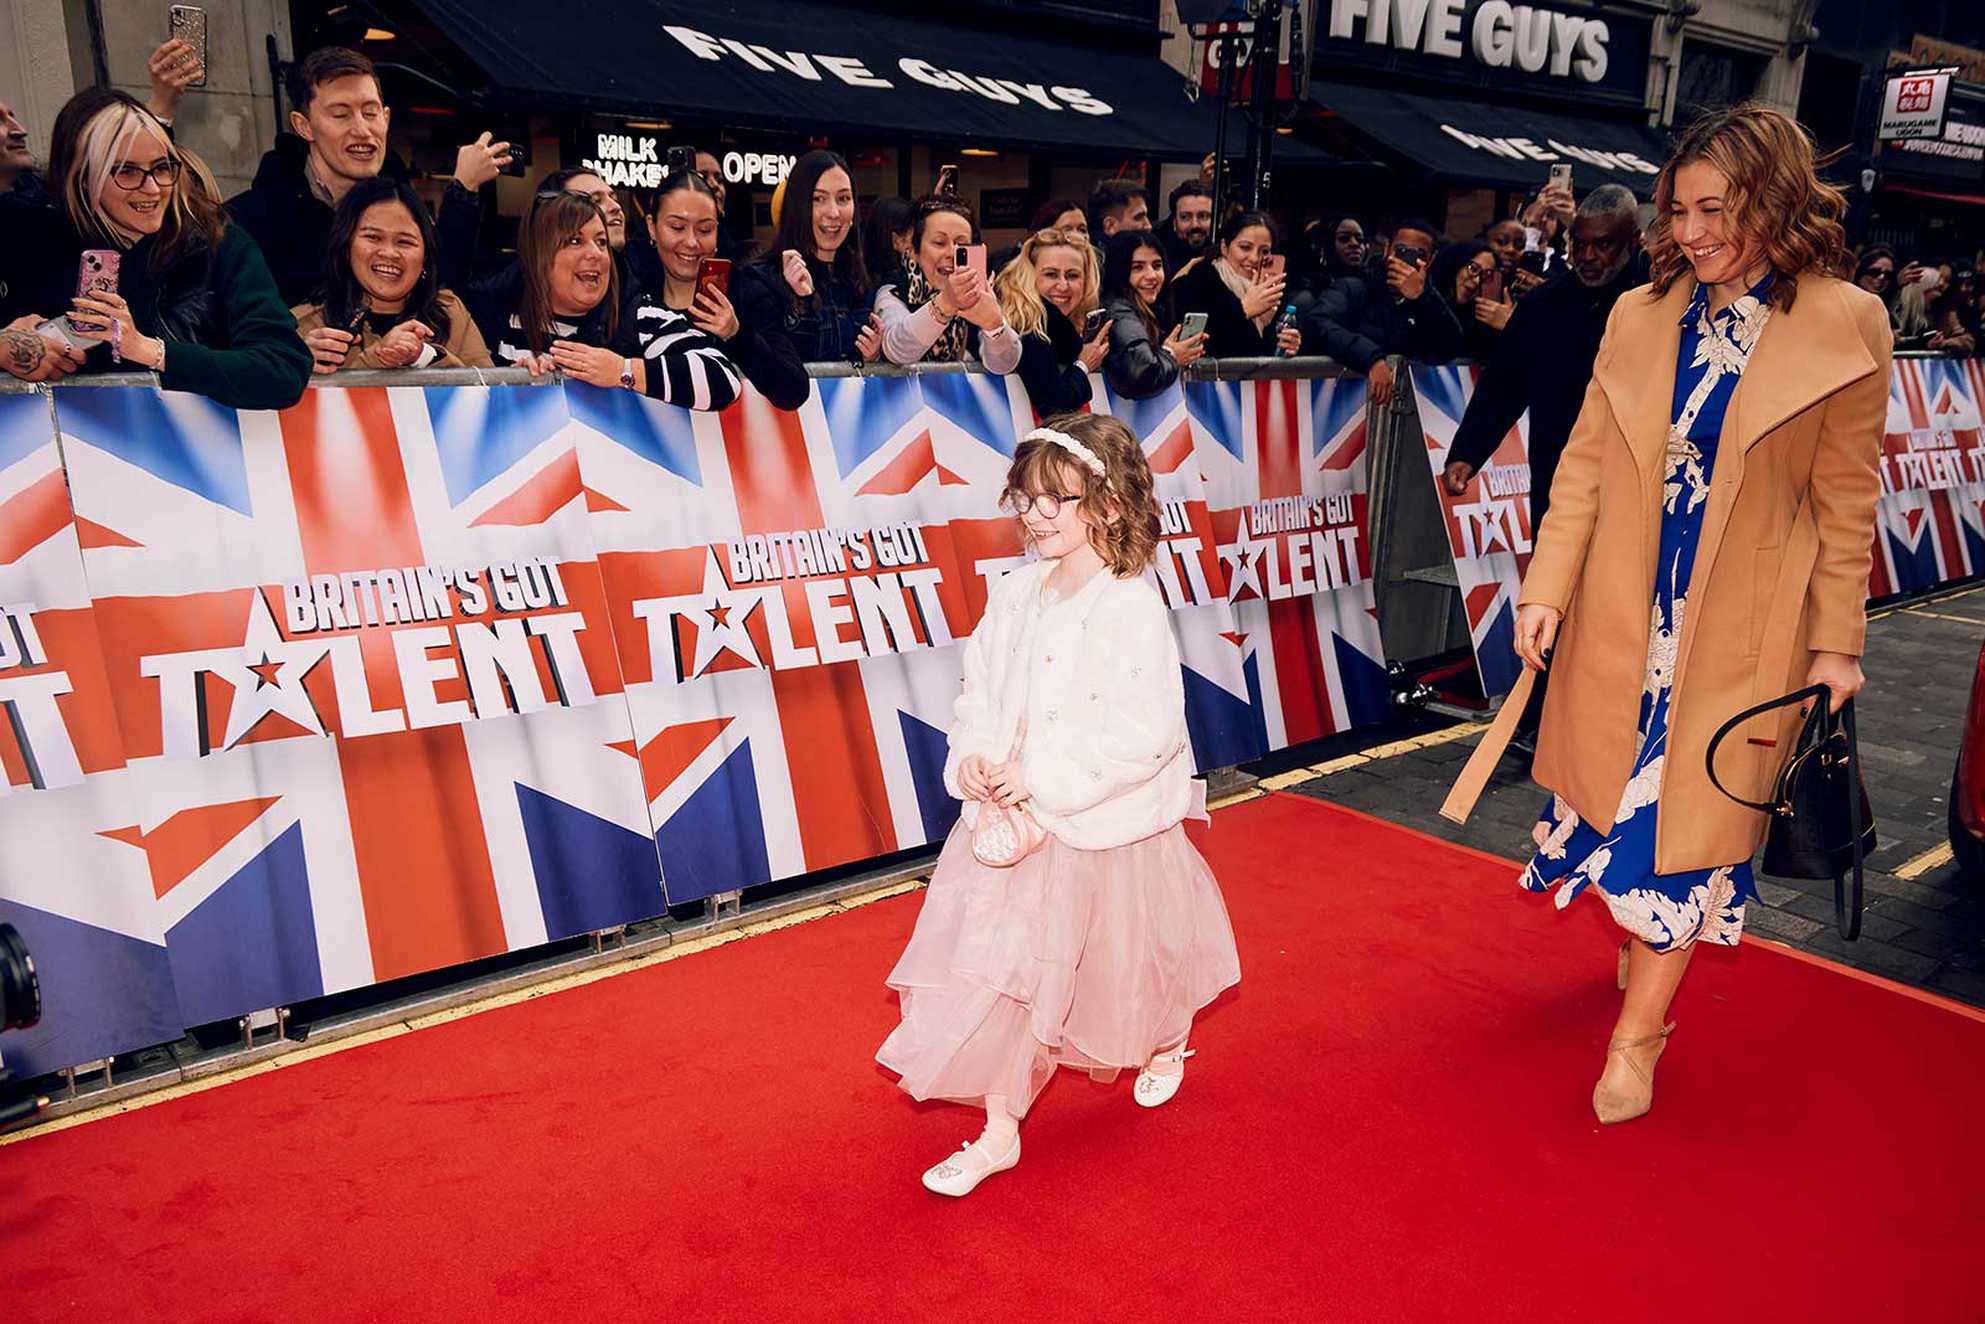 Wish child, Dulcie walking down the red carpet with her mum to watch Britain's Got Talent being recorded.